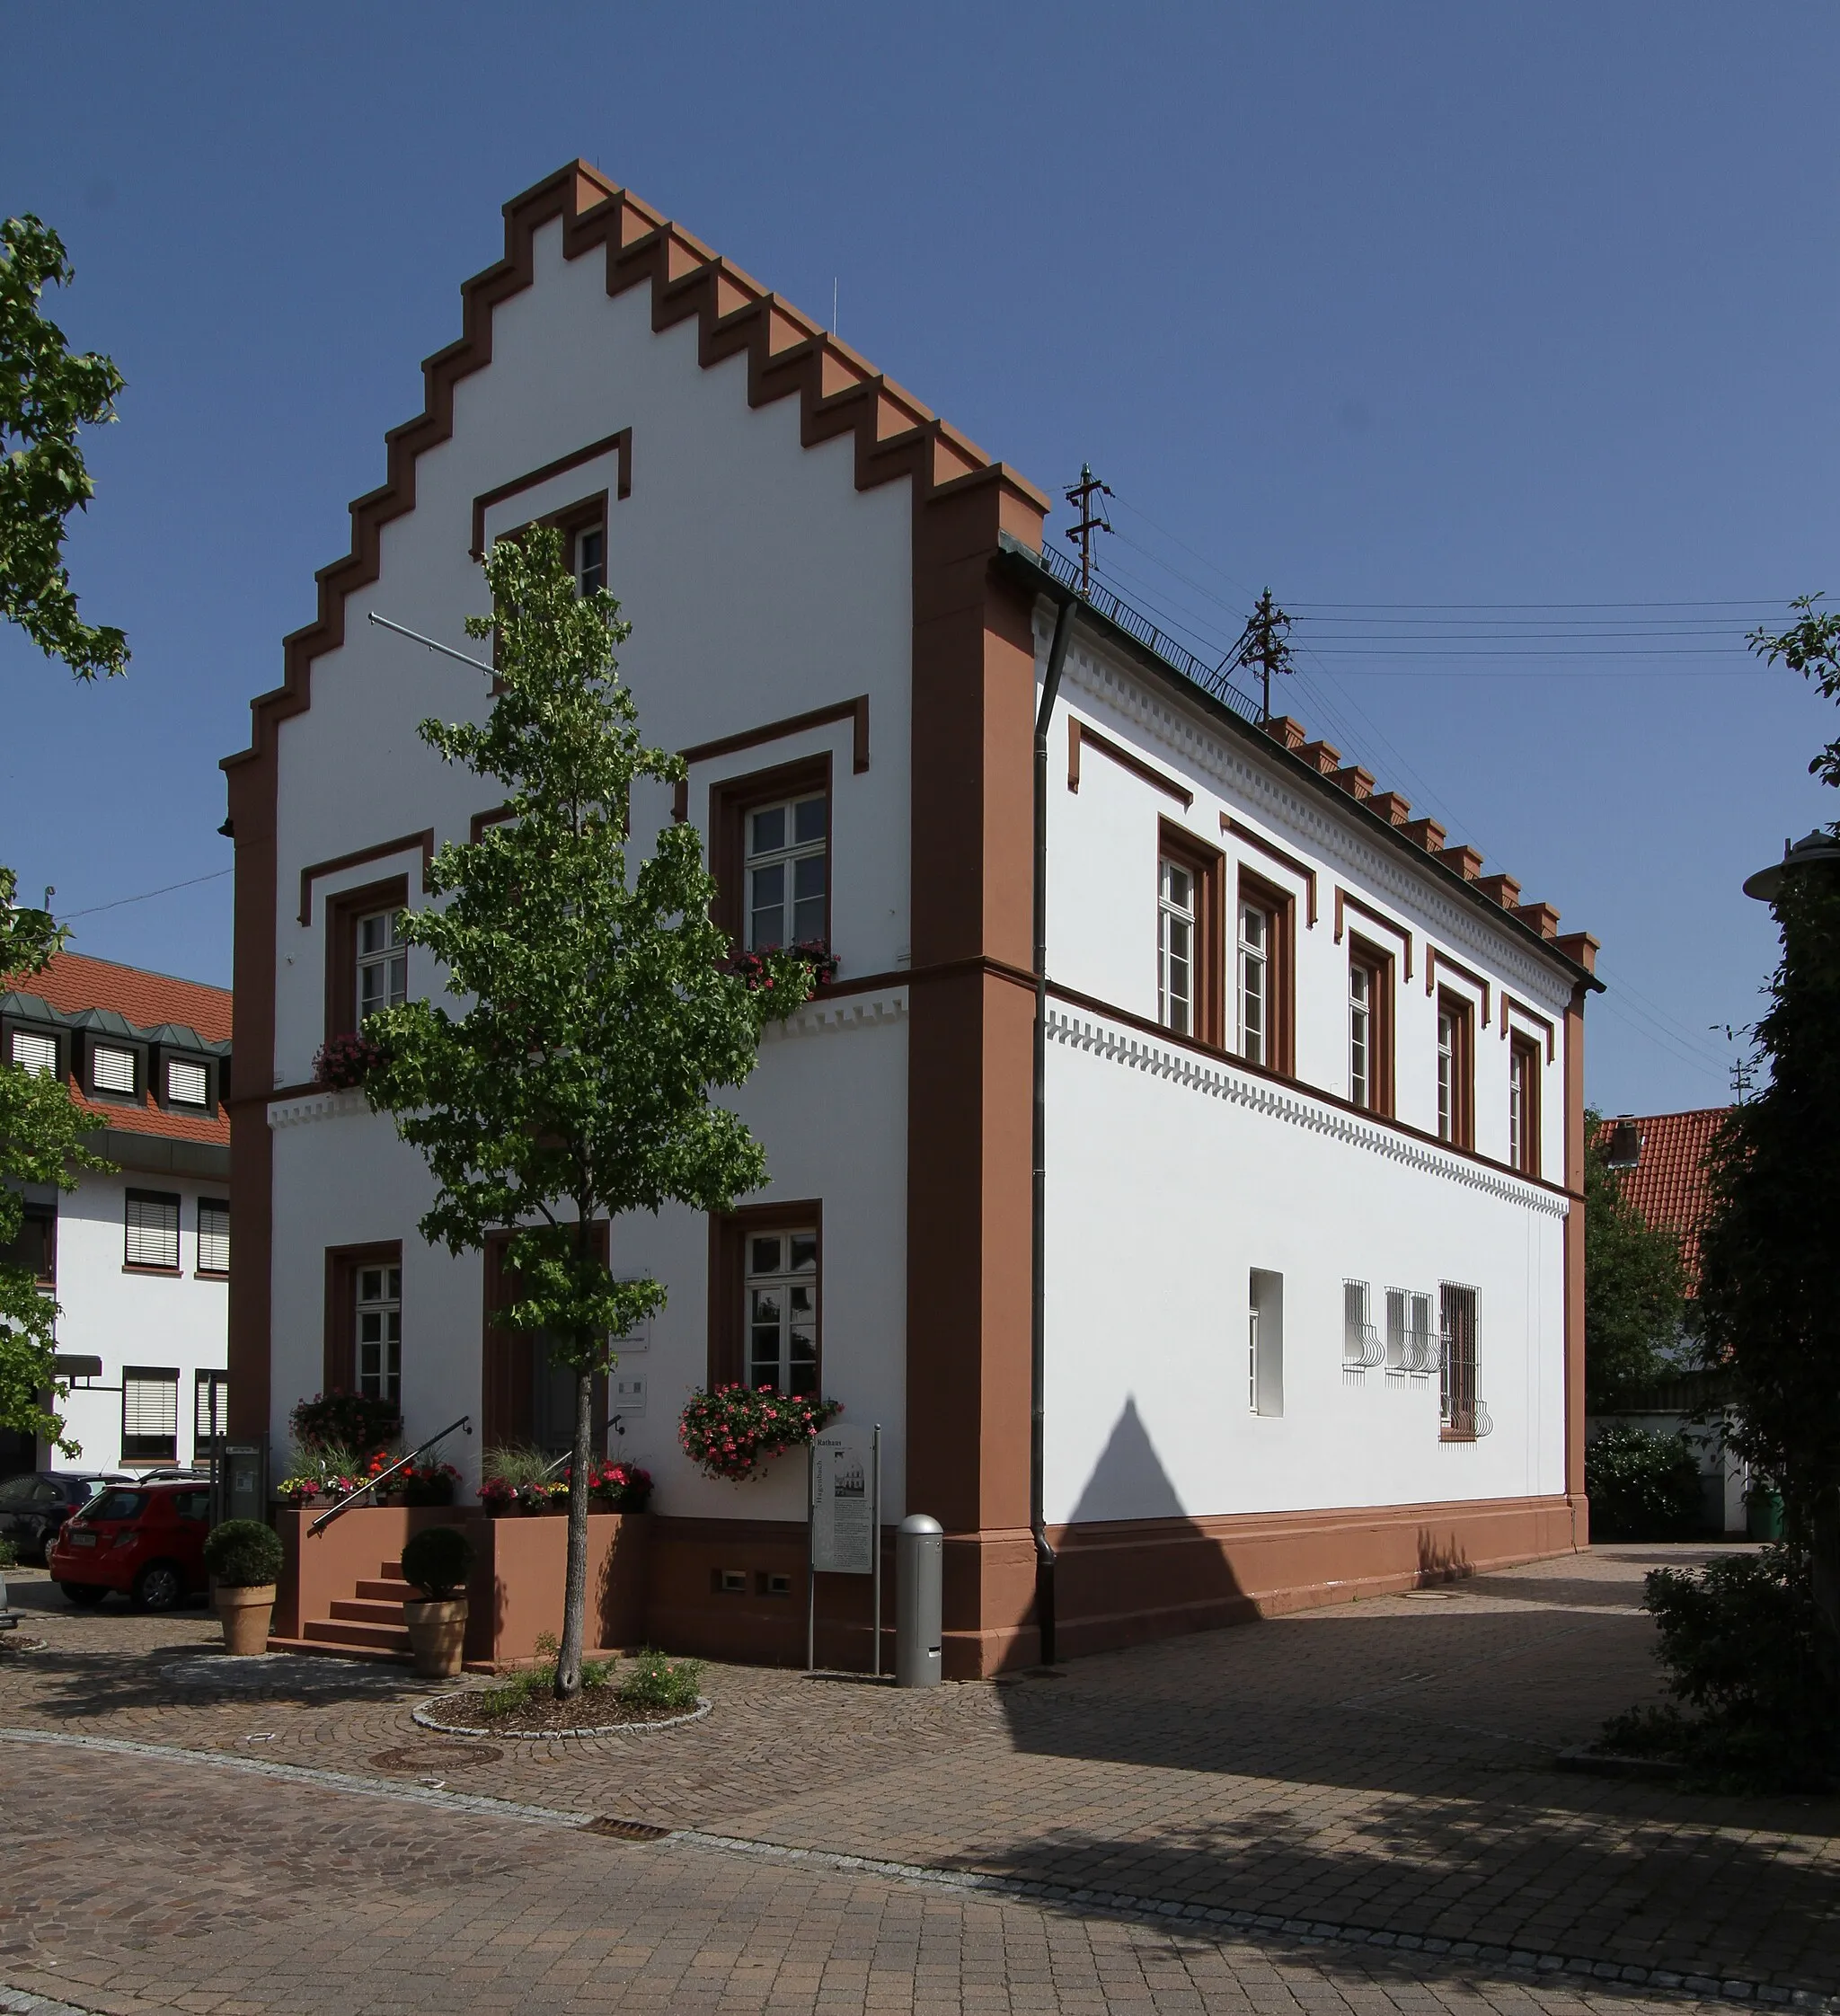 Photo showing: Cultural heritage monument in Hagenbach